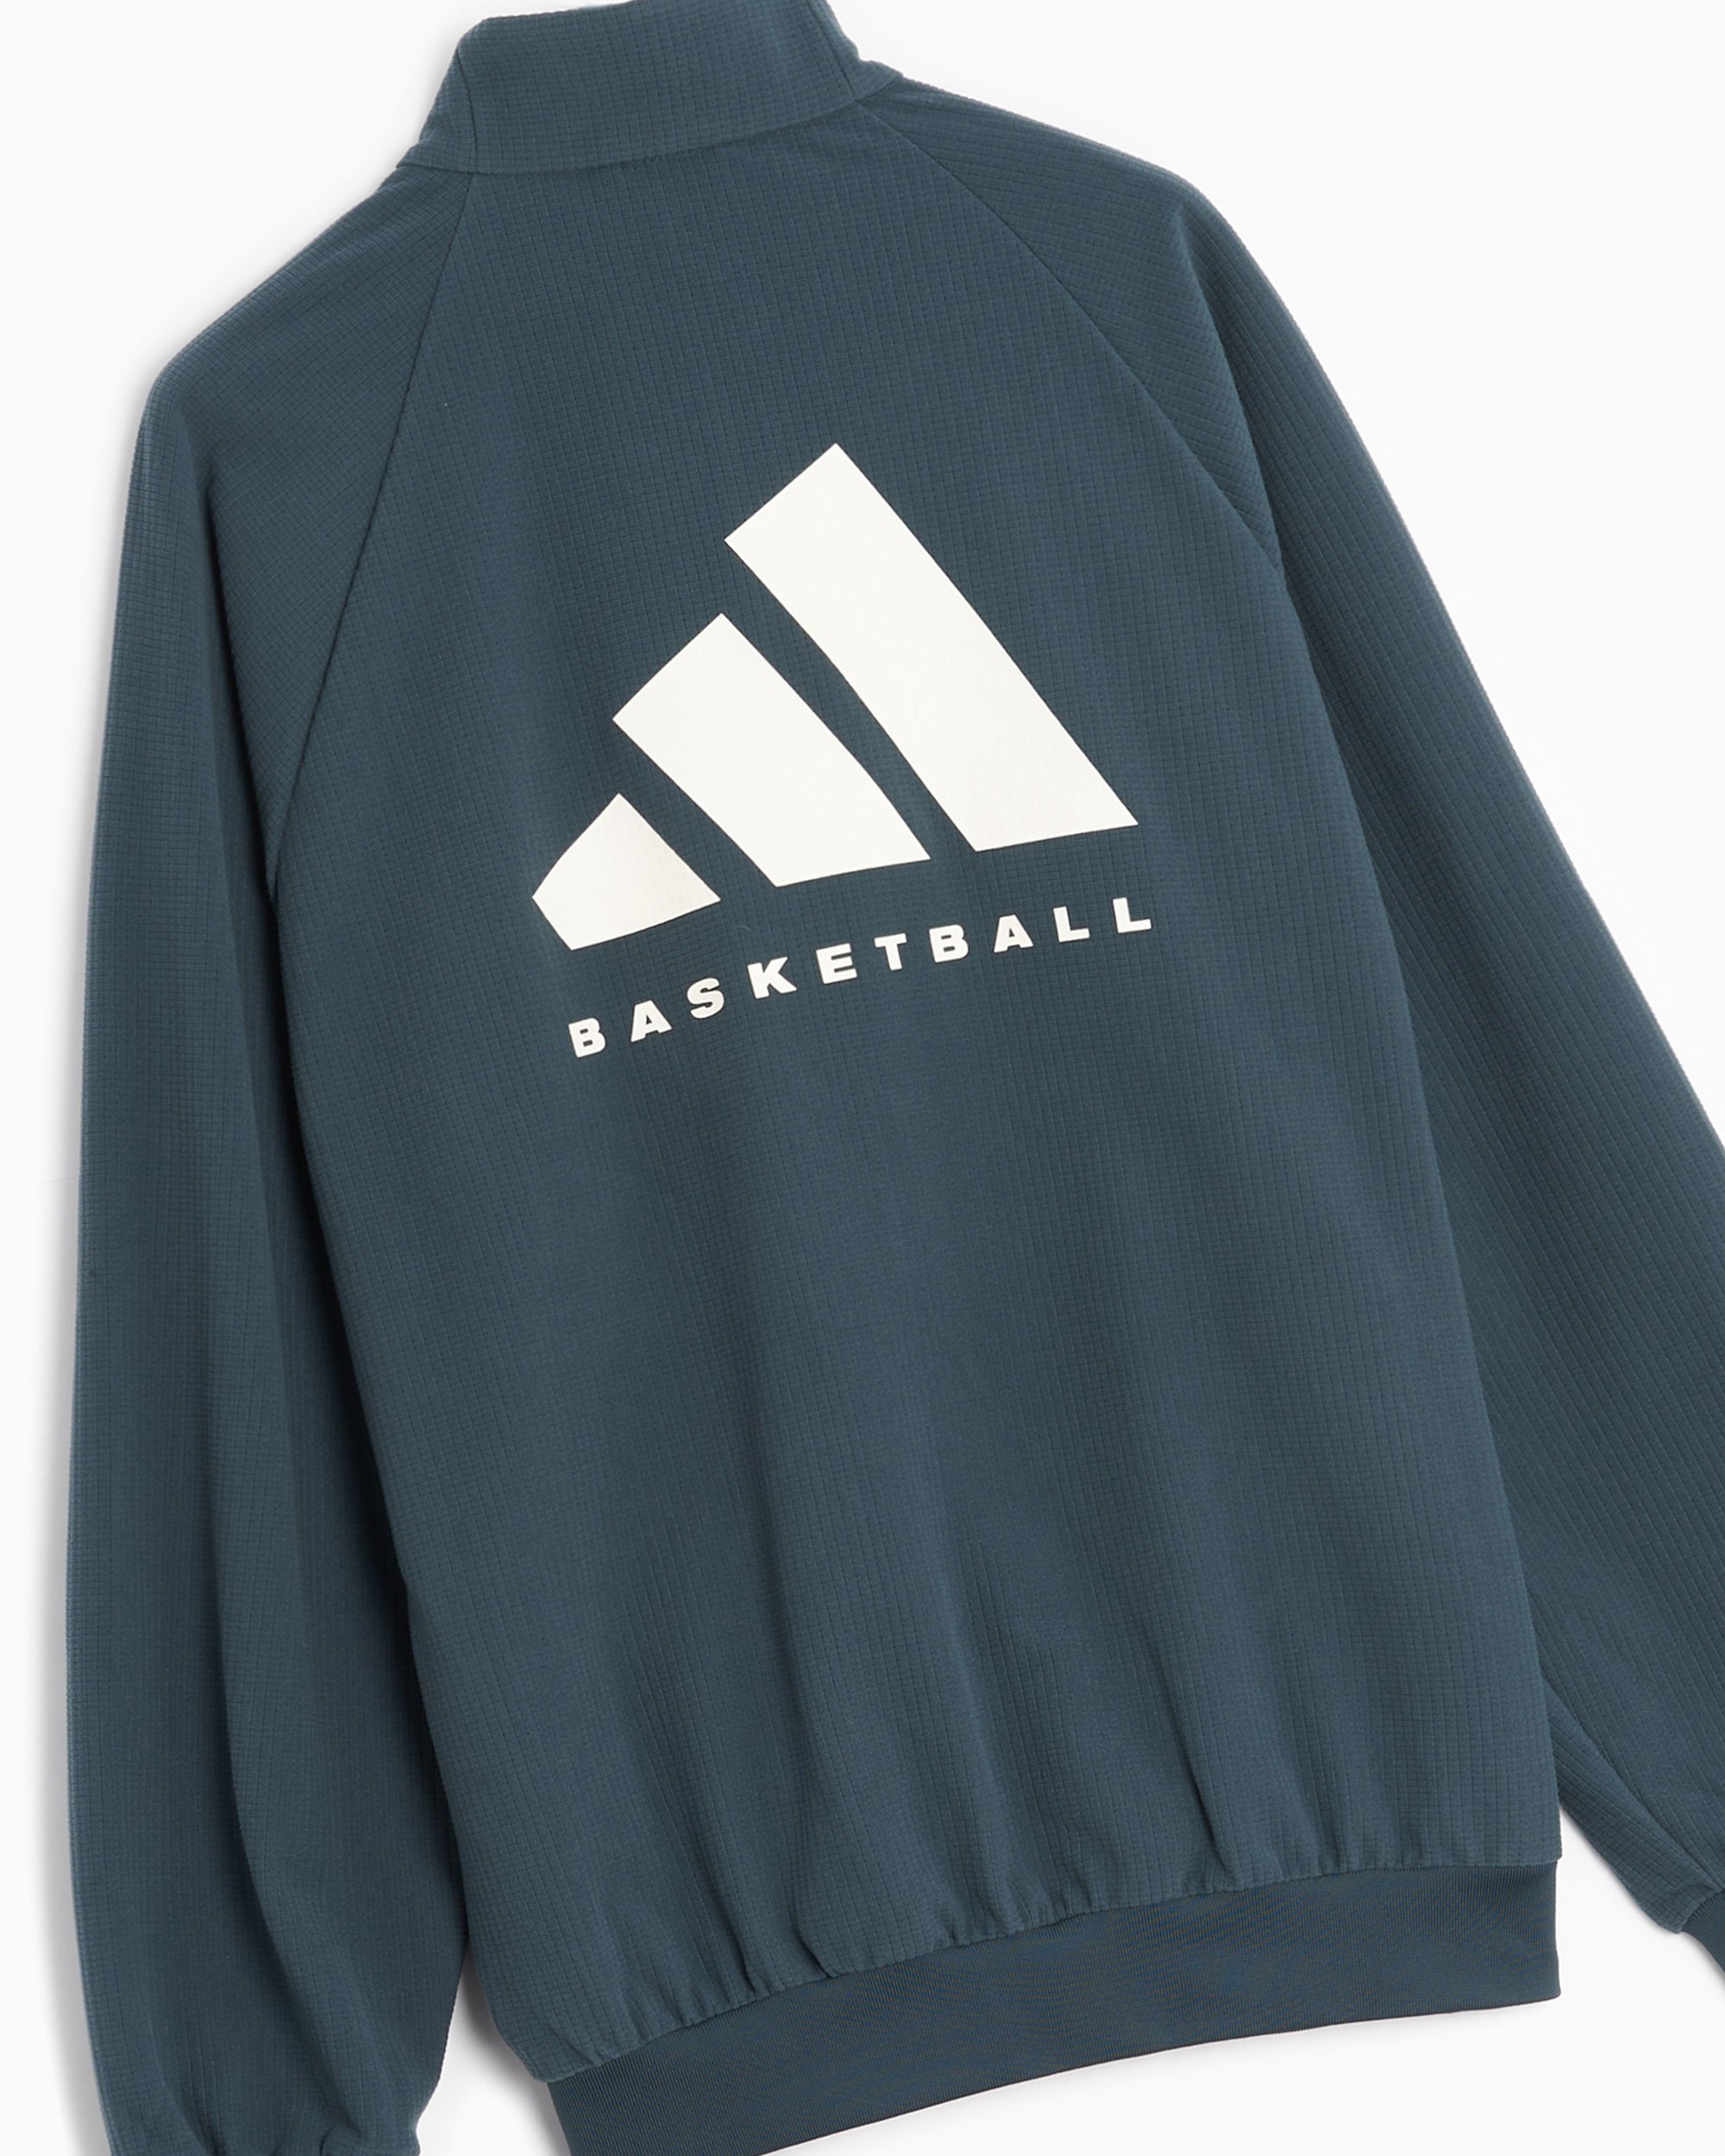 Buy at Track Jacket IT2470| Basketball Green FOOTDISTRICT Unisex One Performance Online adidas